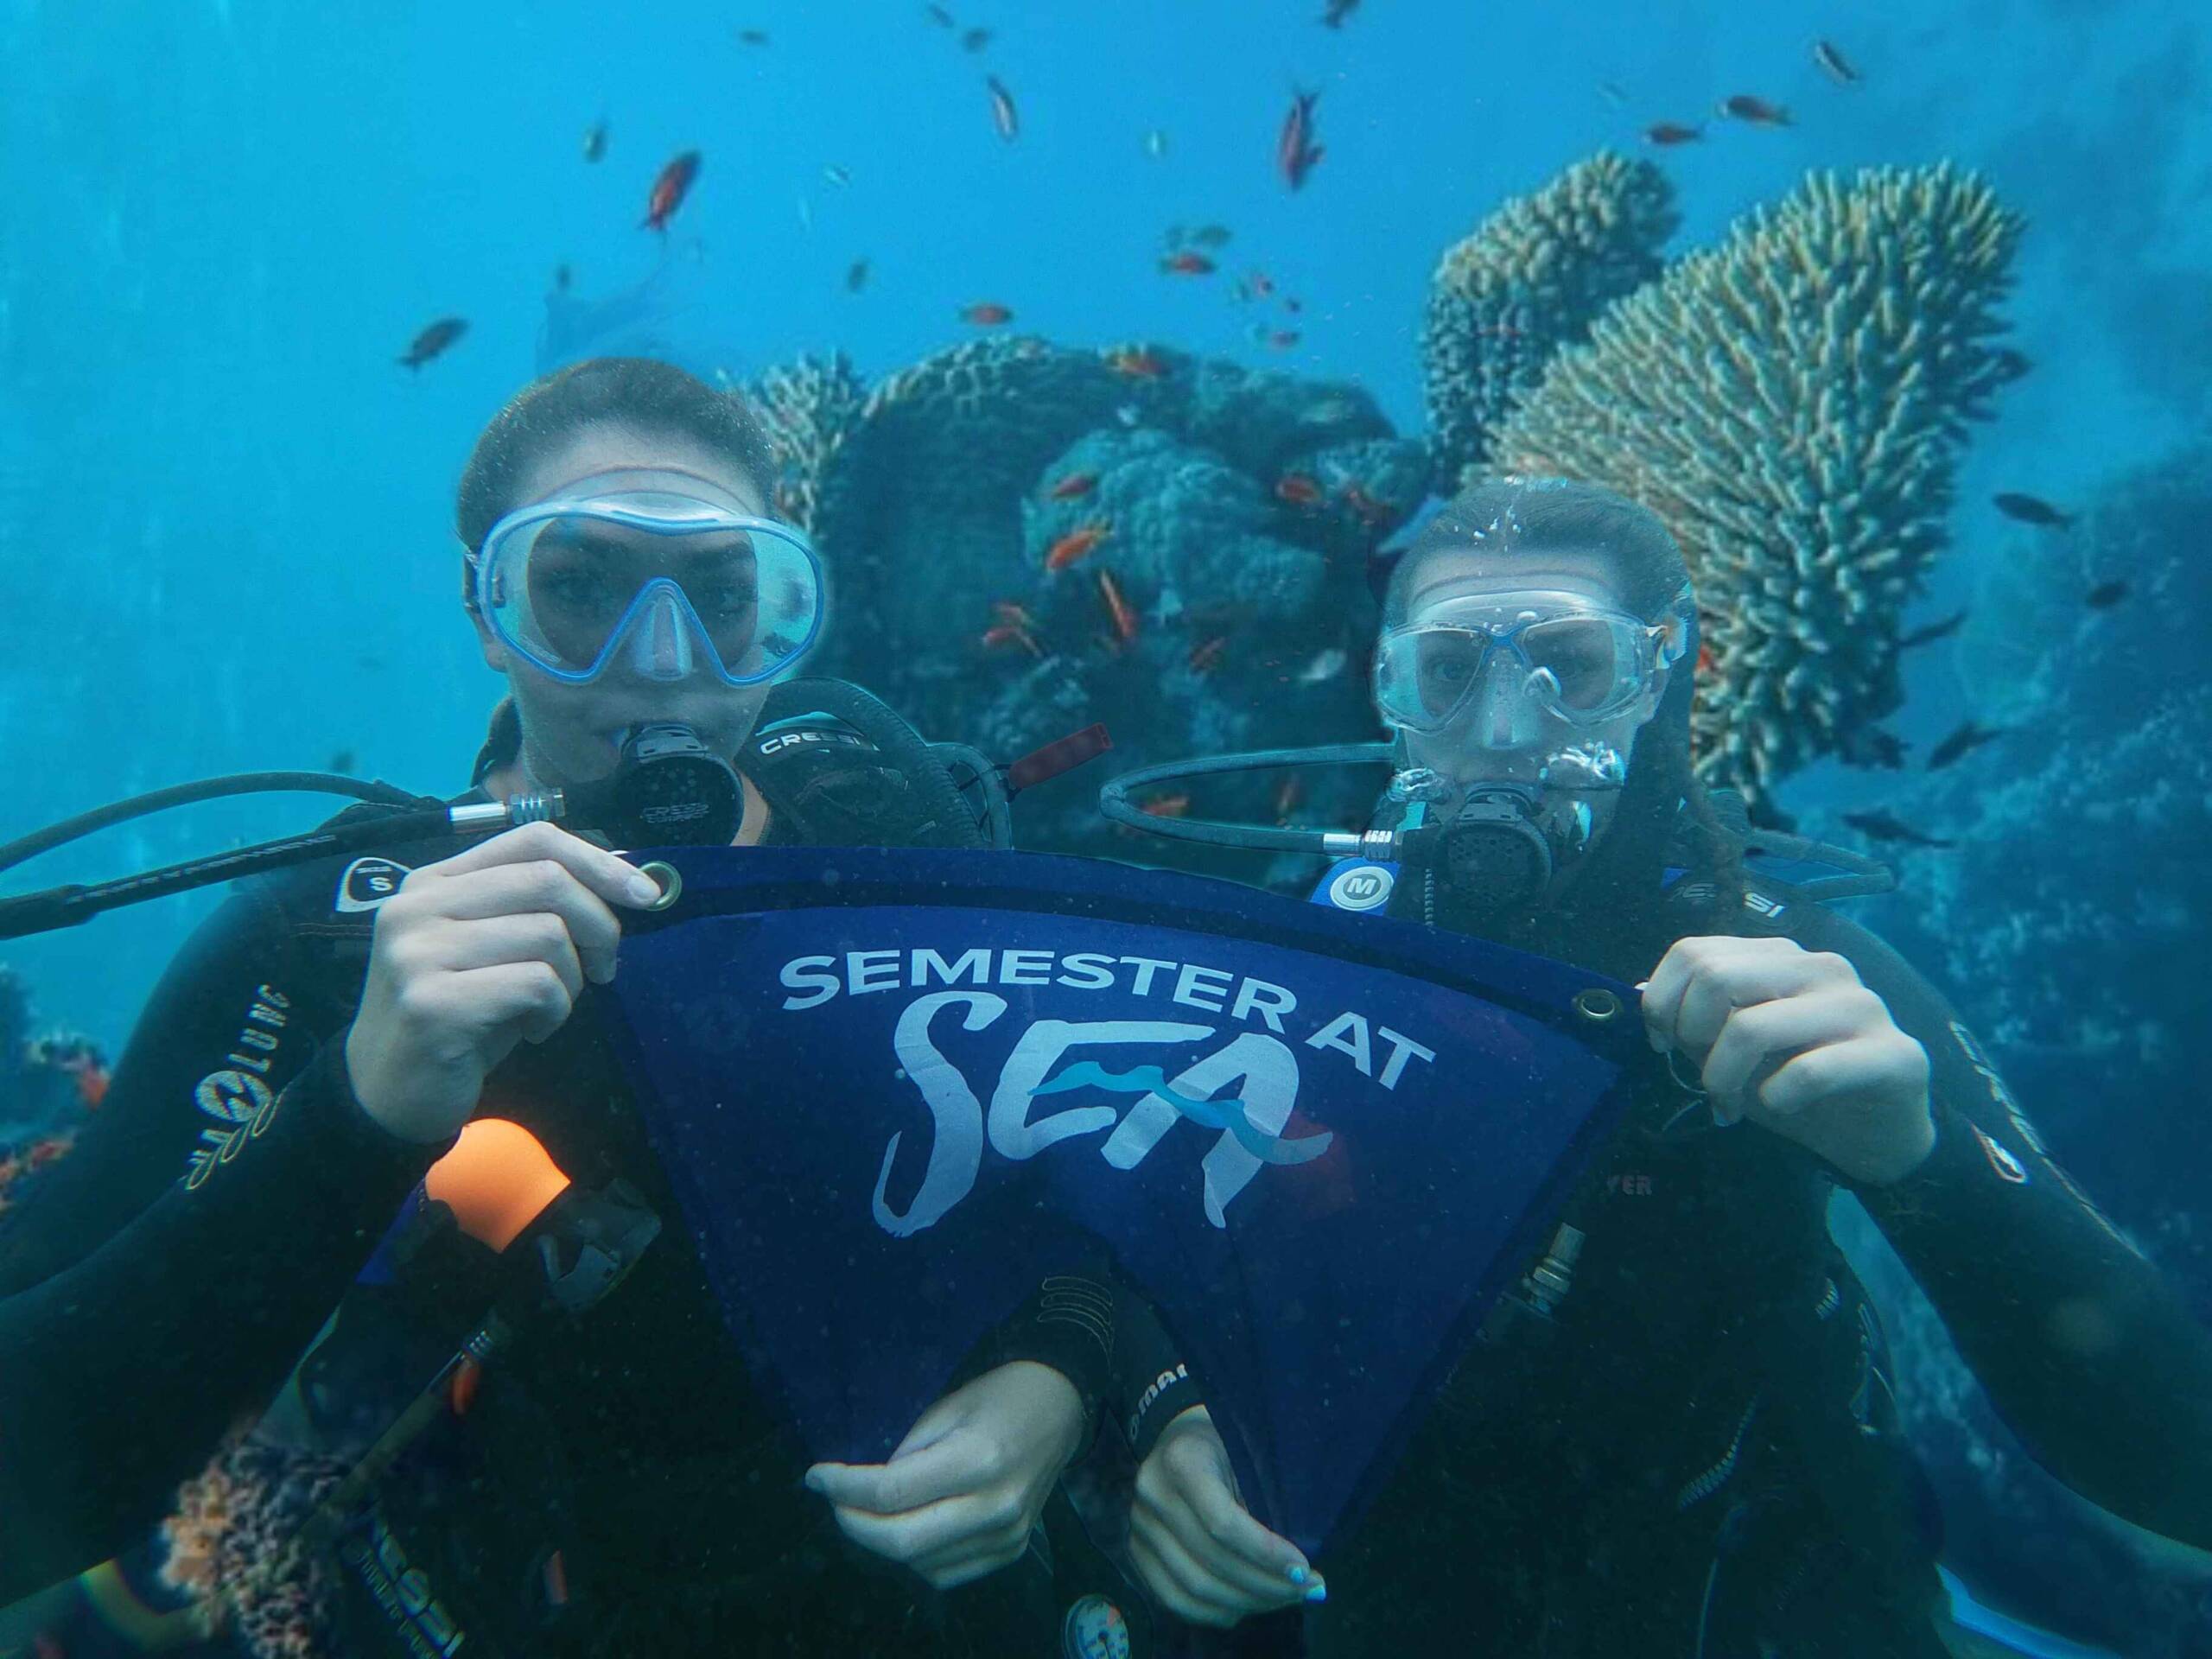 Two people in scuba masks and diving gear pose underwater in front of a large coral mound, holding a small blue flag that says “Semester at Sea.” Orange fish swim around the coral behind them.